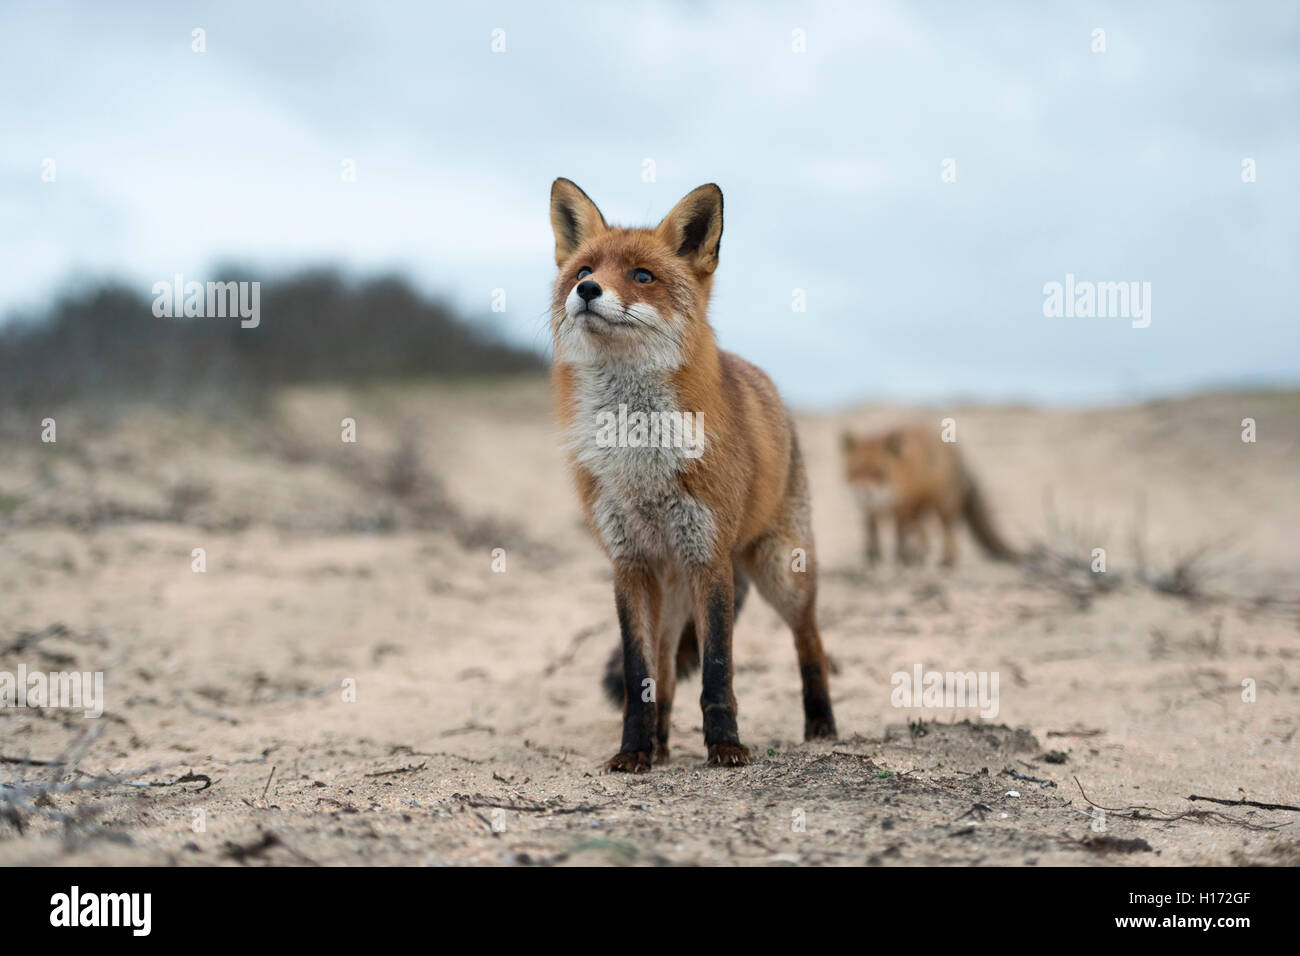 Red Foxes / Rotfuchs ( Vulpes vulpes ) standing on a sandy path, in nice winter fur, funny close-up from a low point of view. Stock Photo